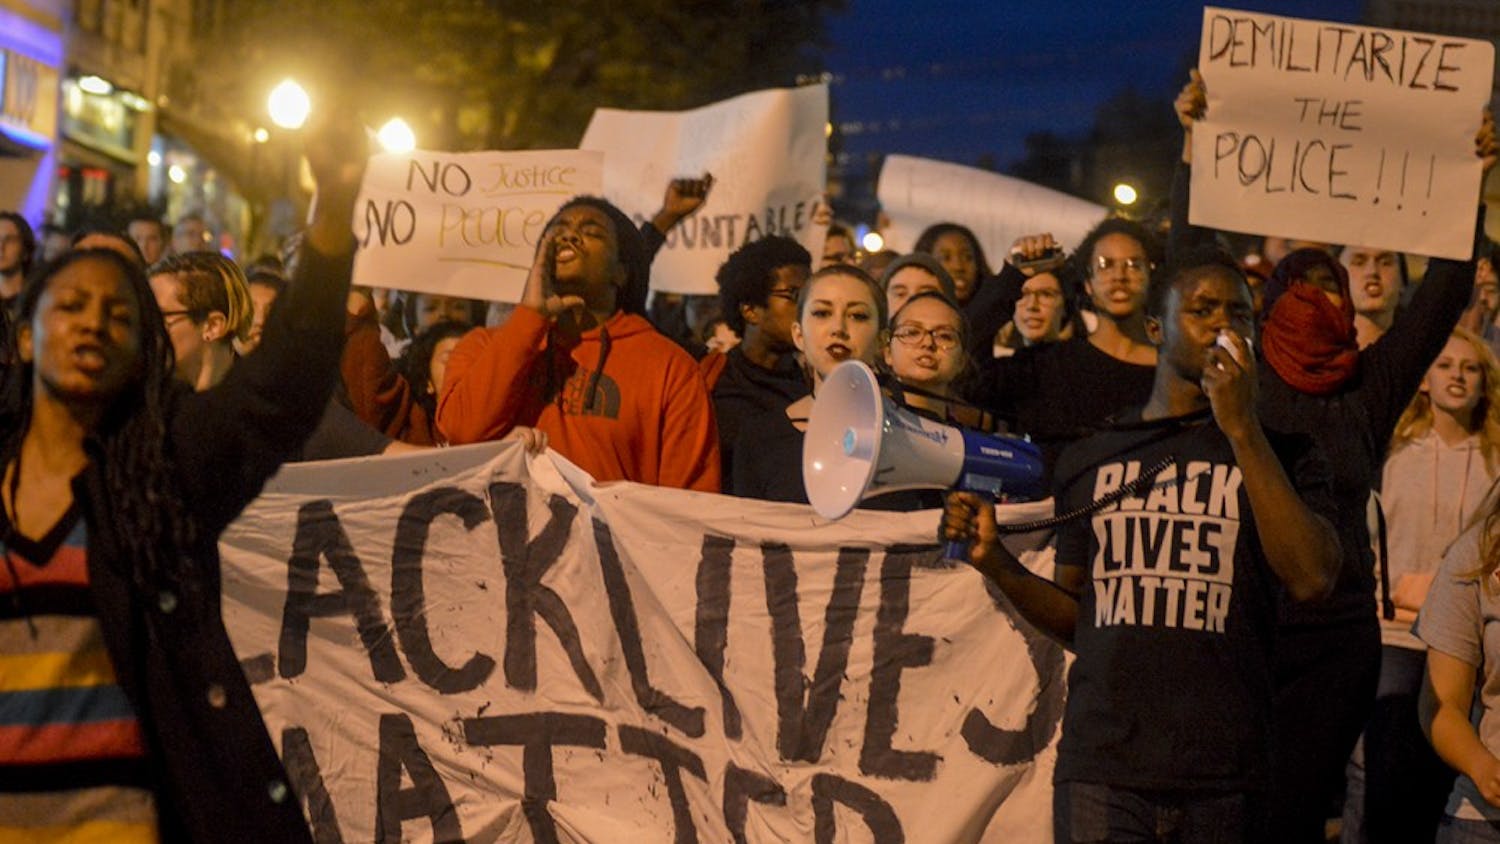 Protesters march to the Bloomington Police Department during the Black Lives Matter protest Monday evening from the sample gates. The event, hosted by Students Against State Violence and the Black Student Union, targeted the Bloomington Police Department because of their failure to bring justice in the 2015 case of Joseph Smedley.